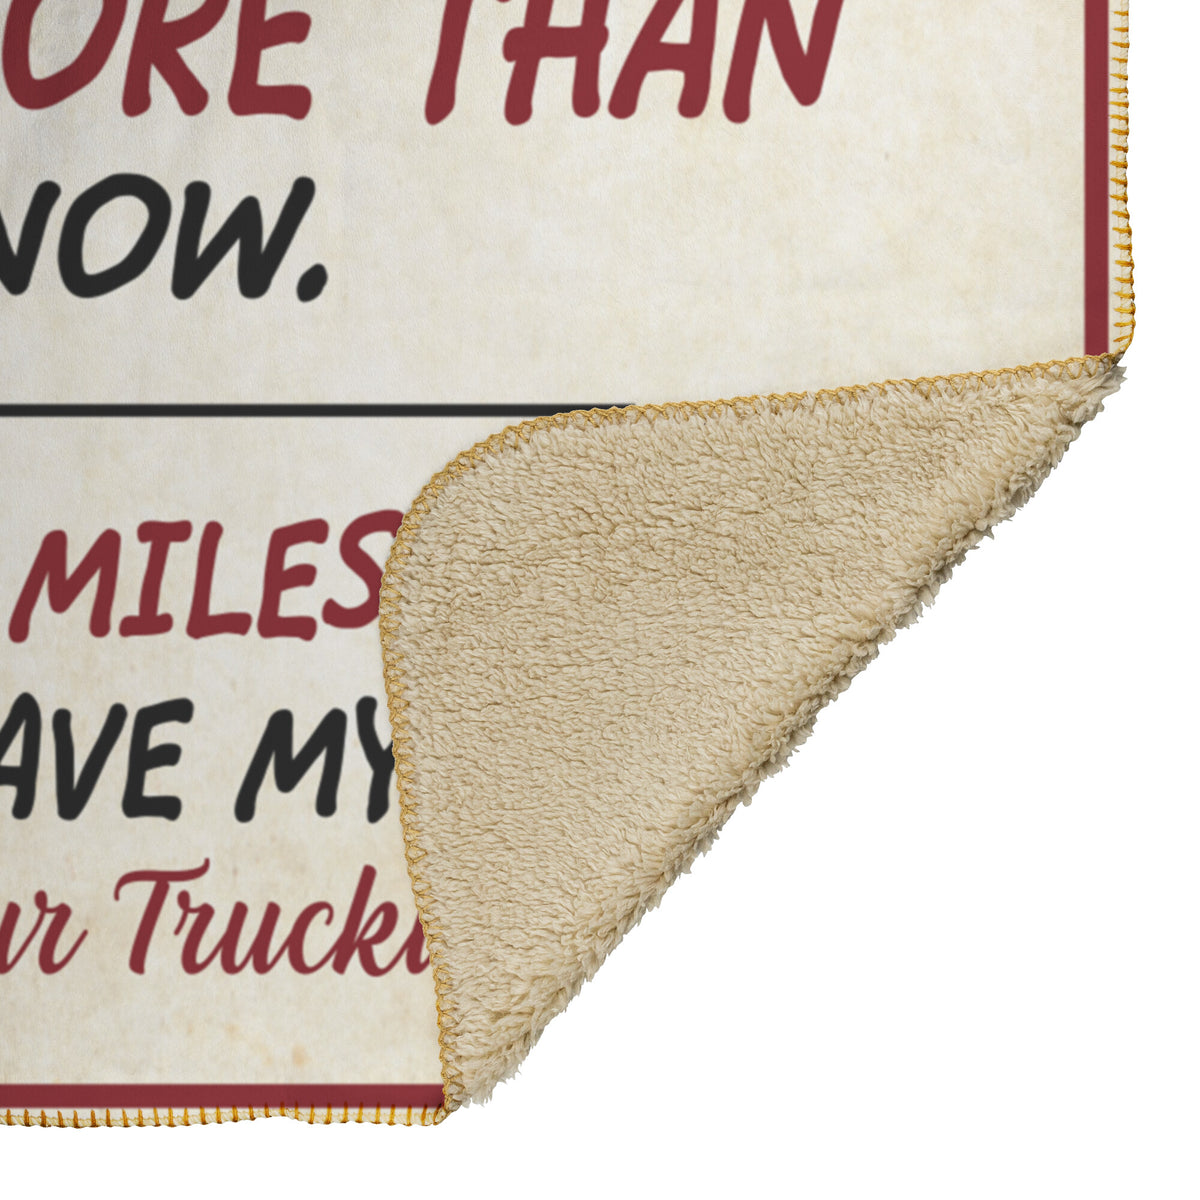 To My Favorite Seat Cover - Blanket - Peterbilt Dump Truck - Free Shipping